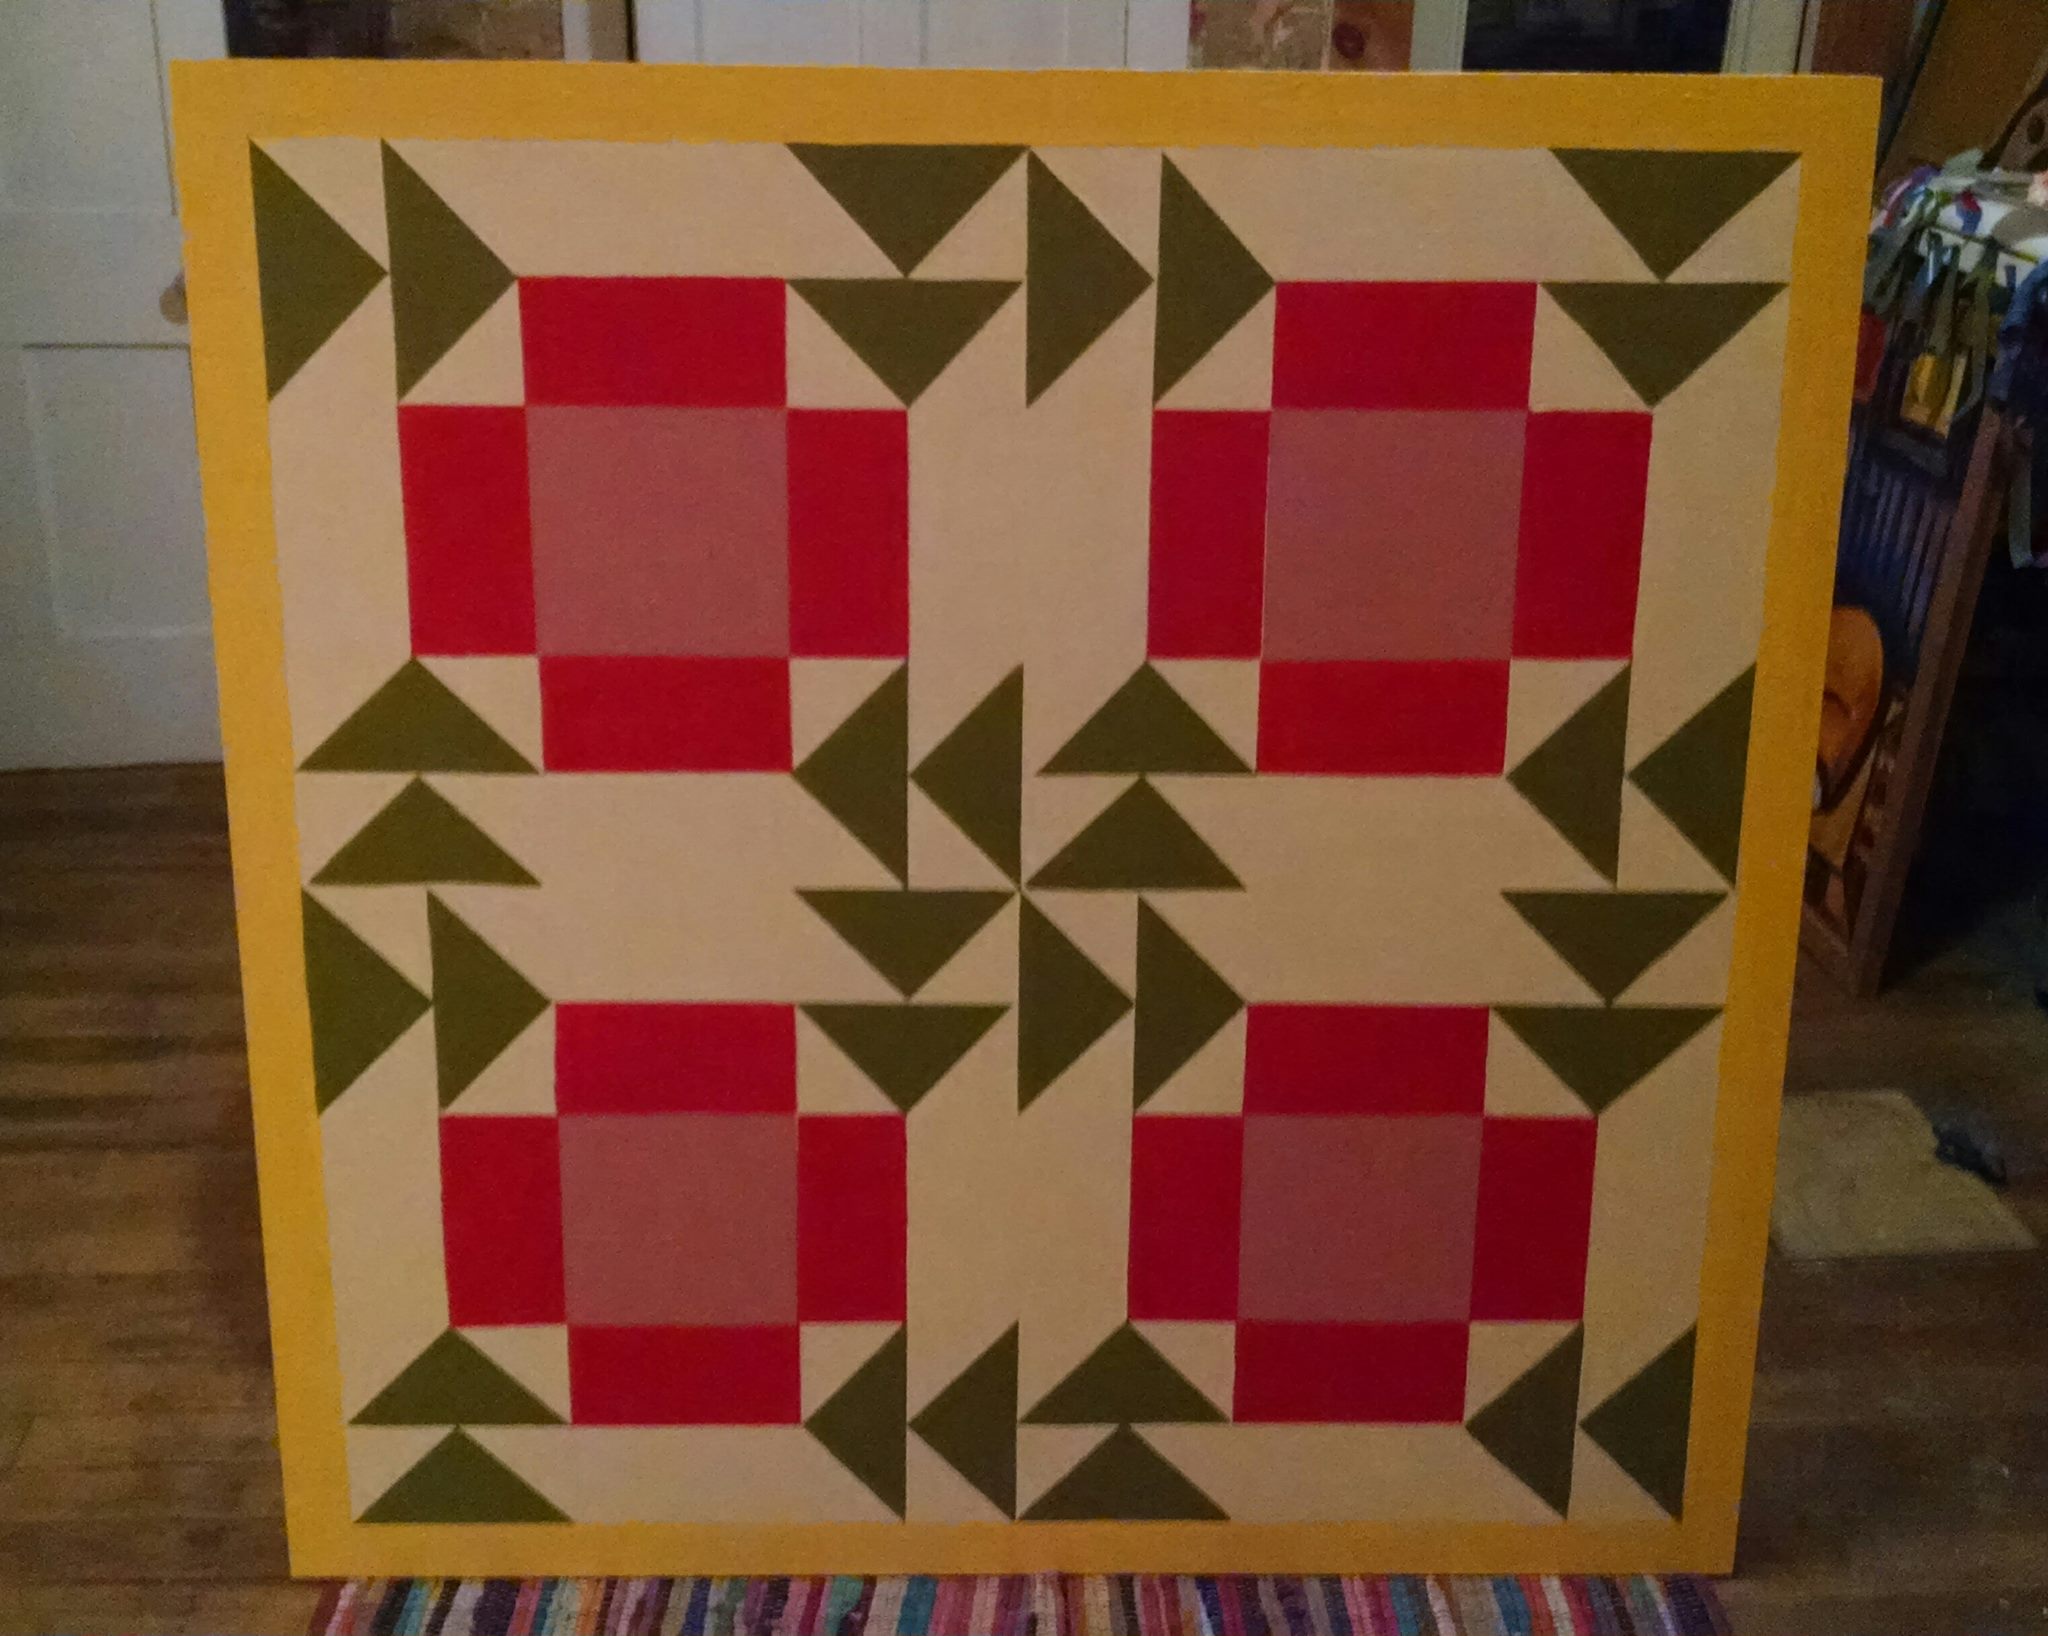 Image of a painting that looks reminiscent of a quilt